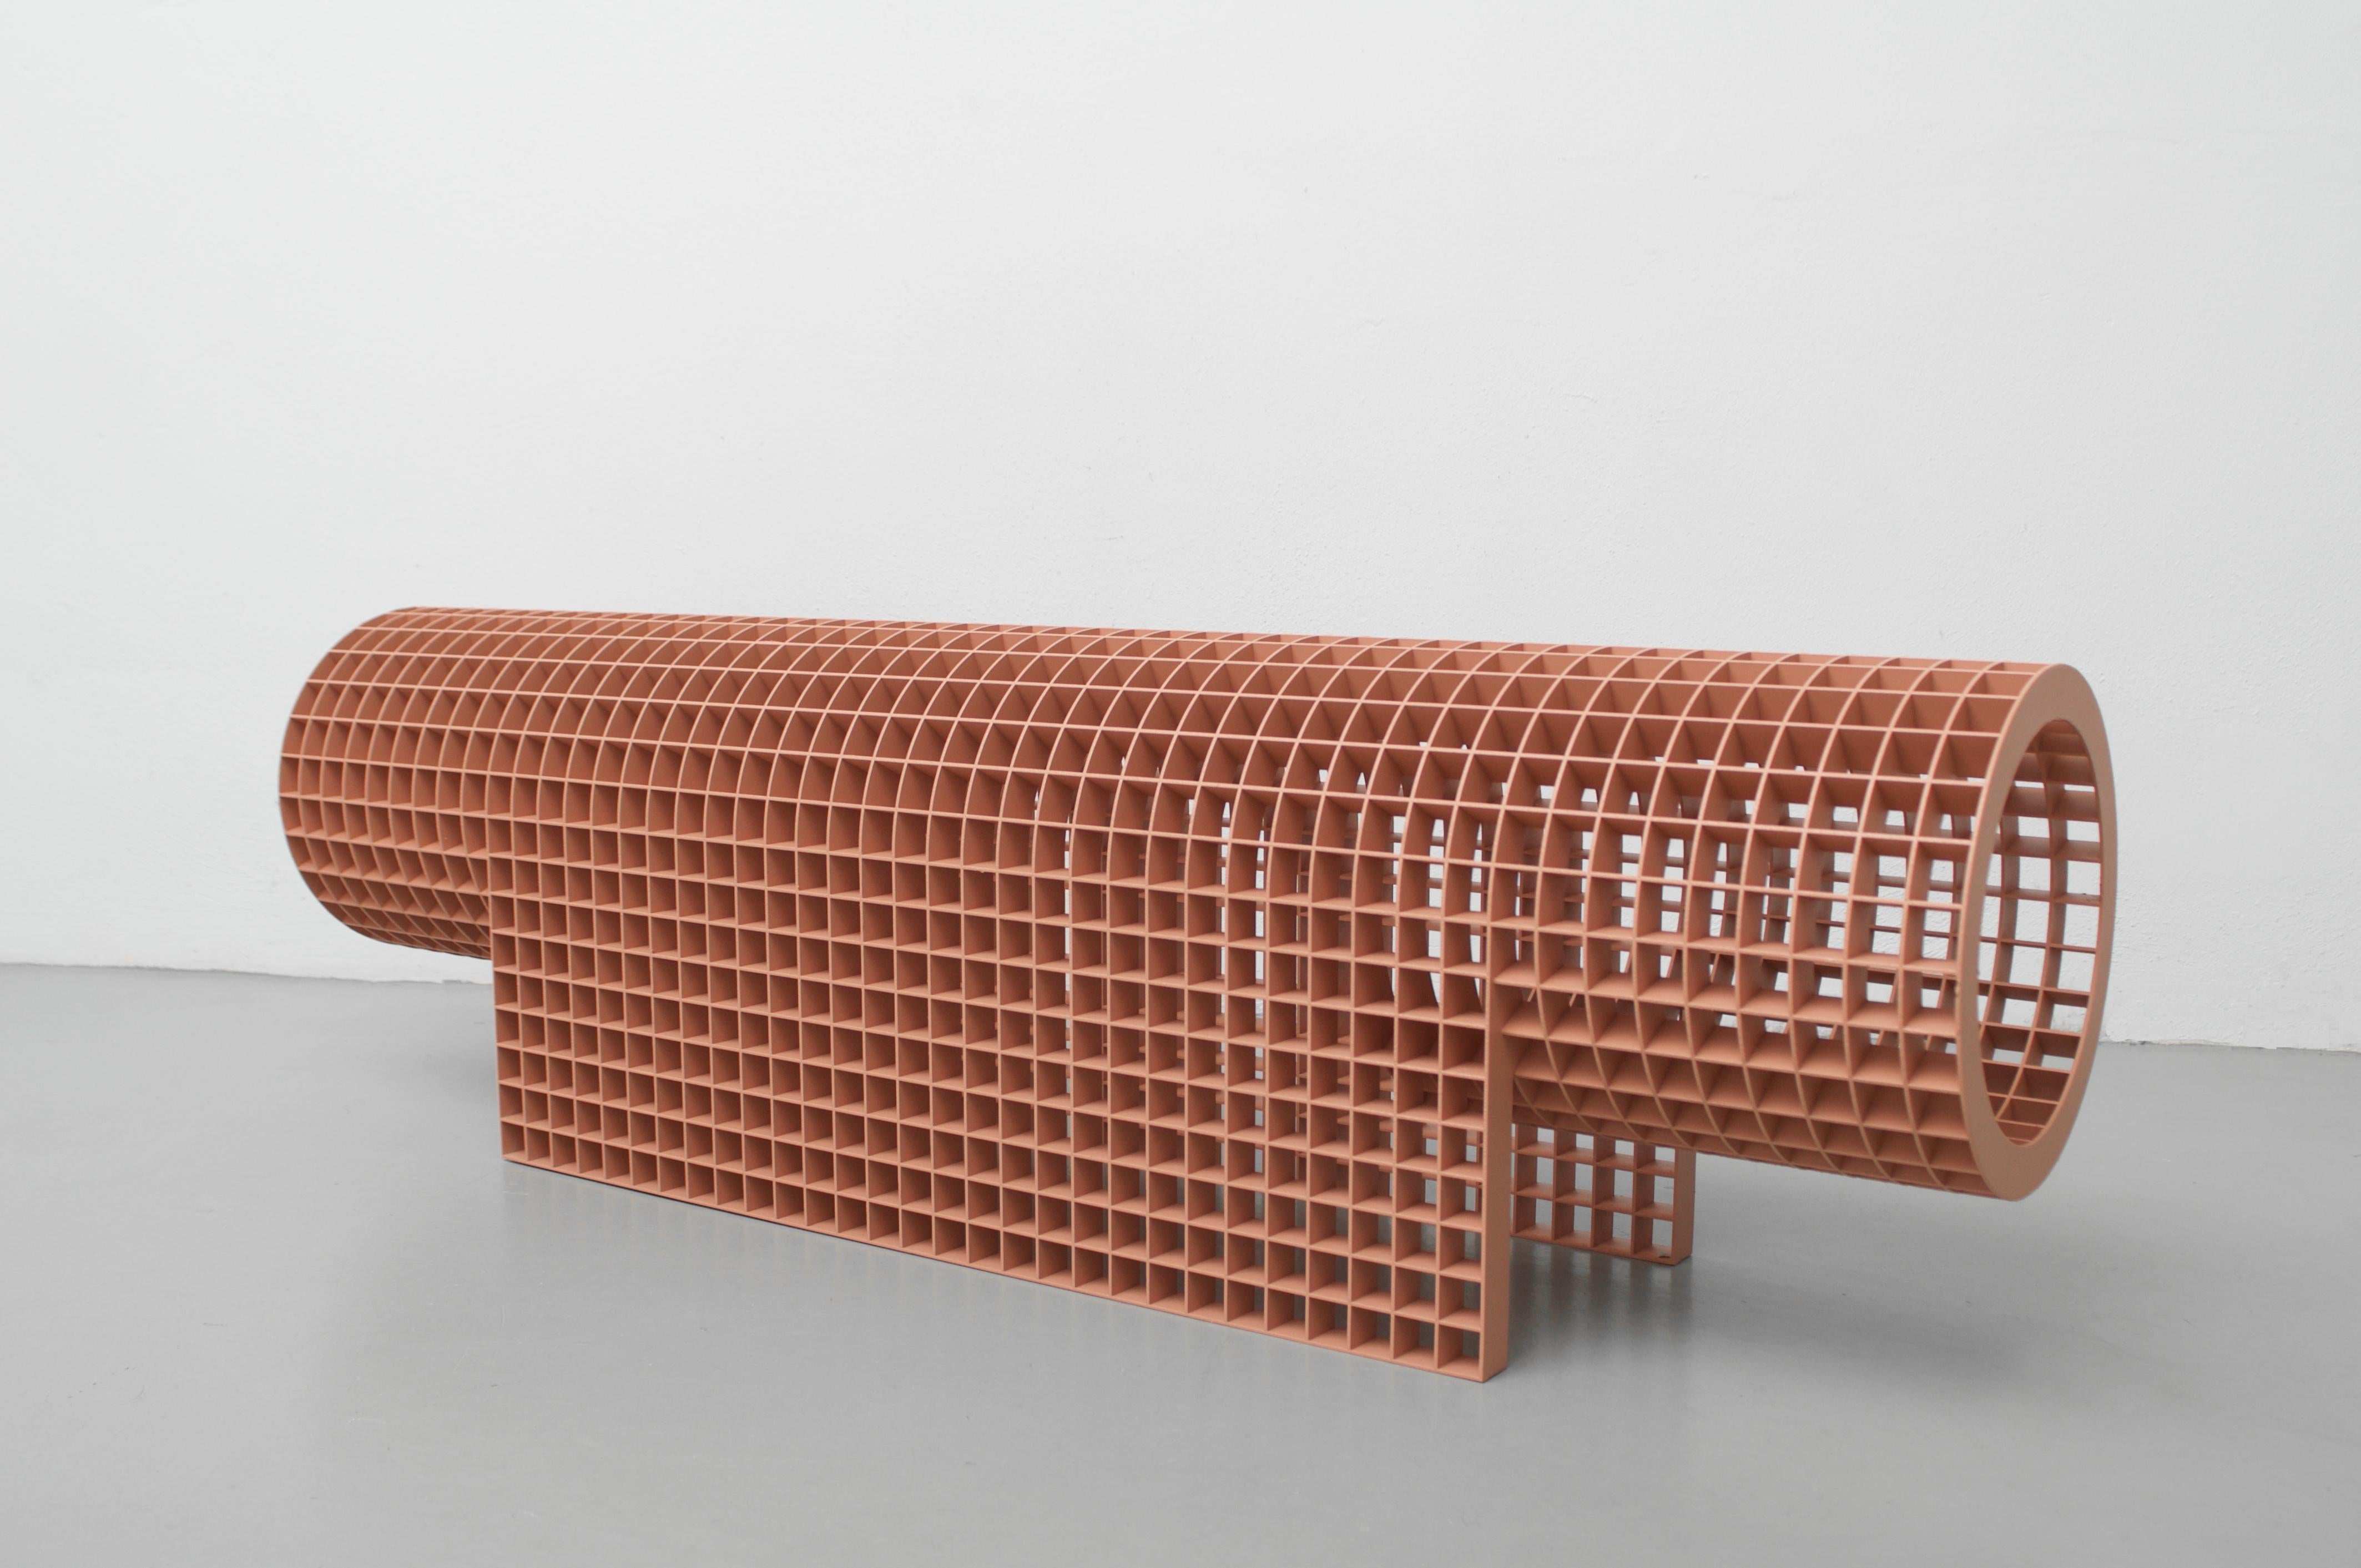 Matrix bench by OS And OOS
Dimensions: 141.2 x 30 x 42.1 cm
Materials: Powder-coated Steel

The Matrix project is and began as a system to allow for
endless configurations and constructions. The base concept
is derived from architectural